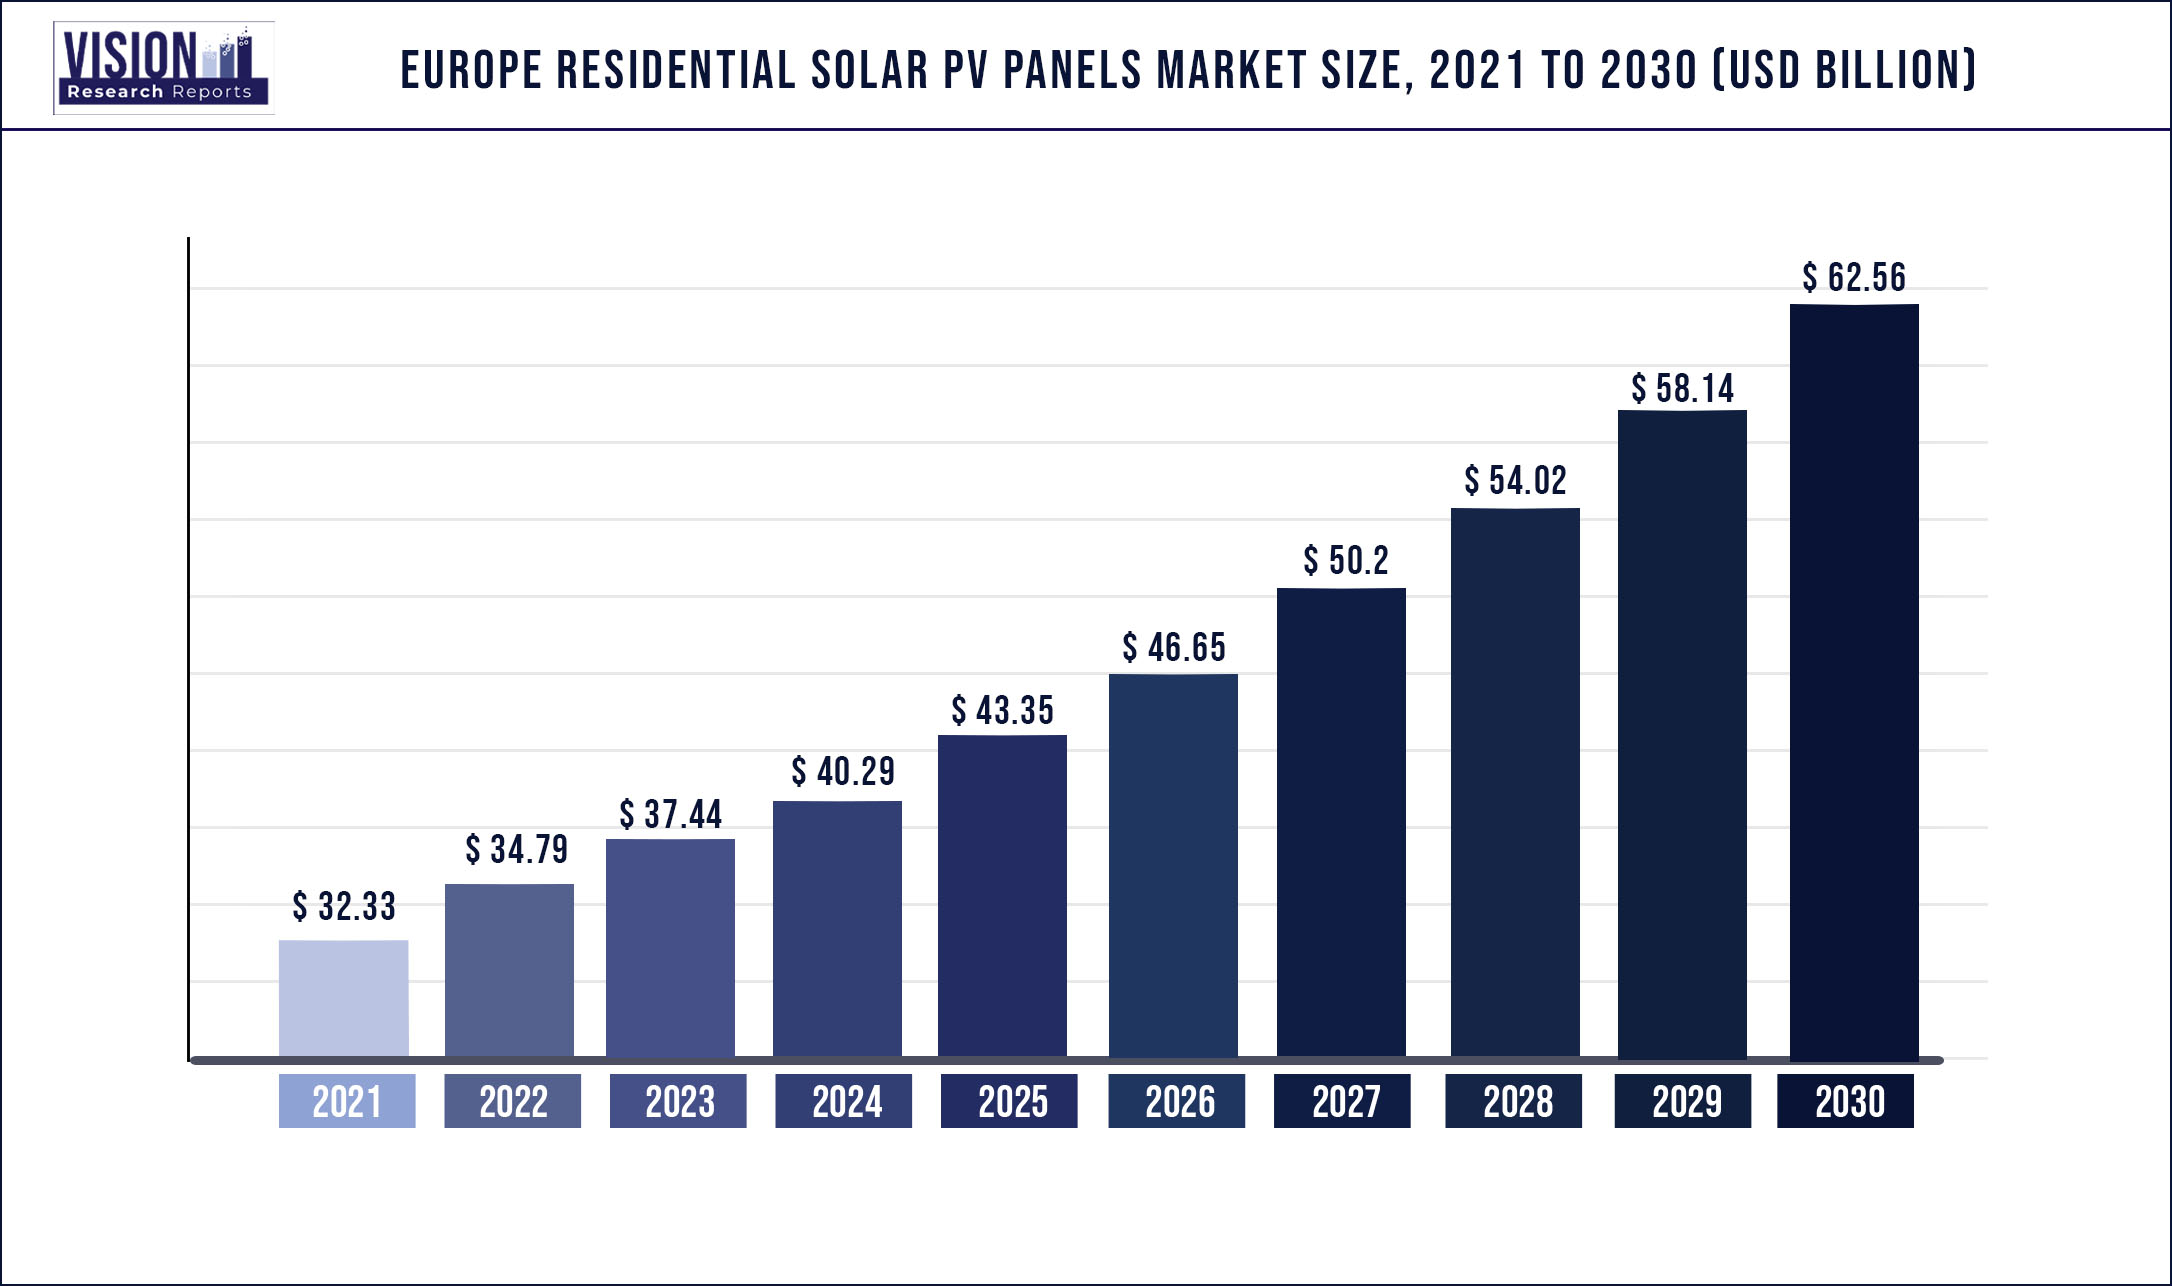 Europe Residential Solar PV Panels Market Size 2021 to 2030